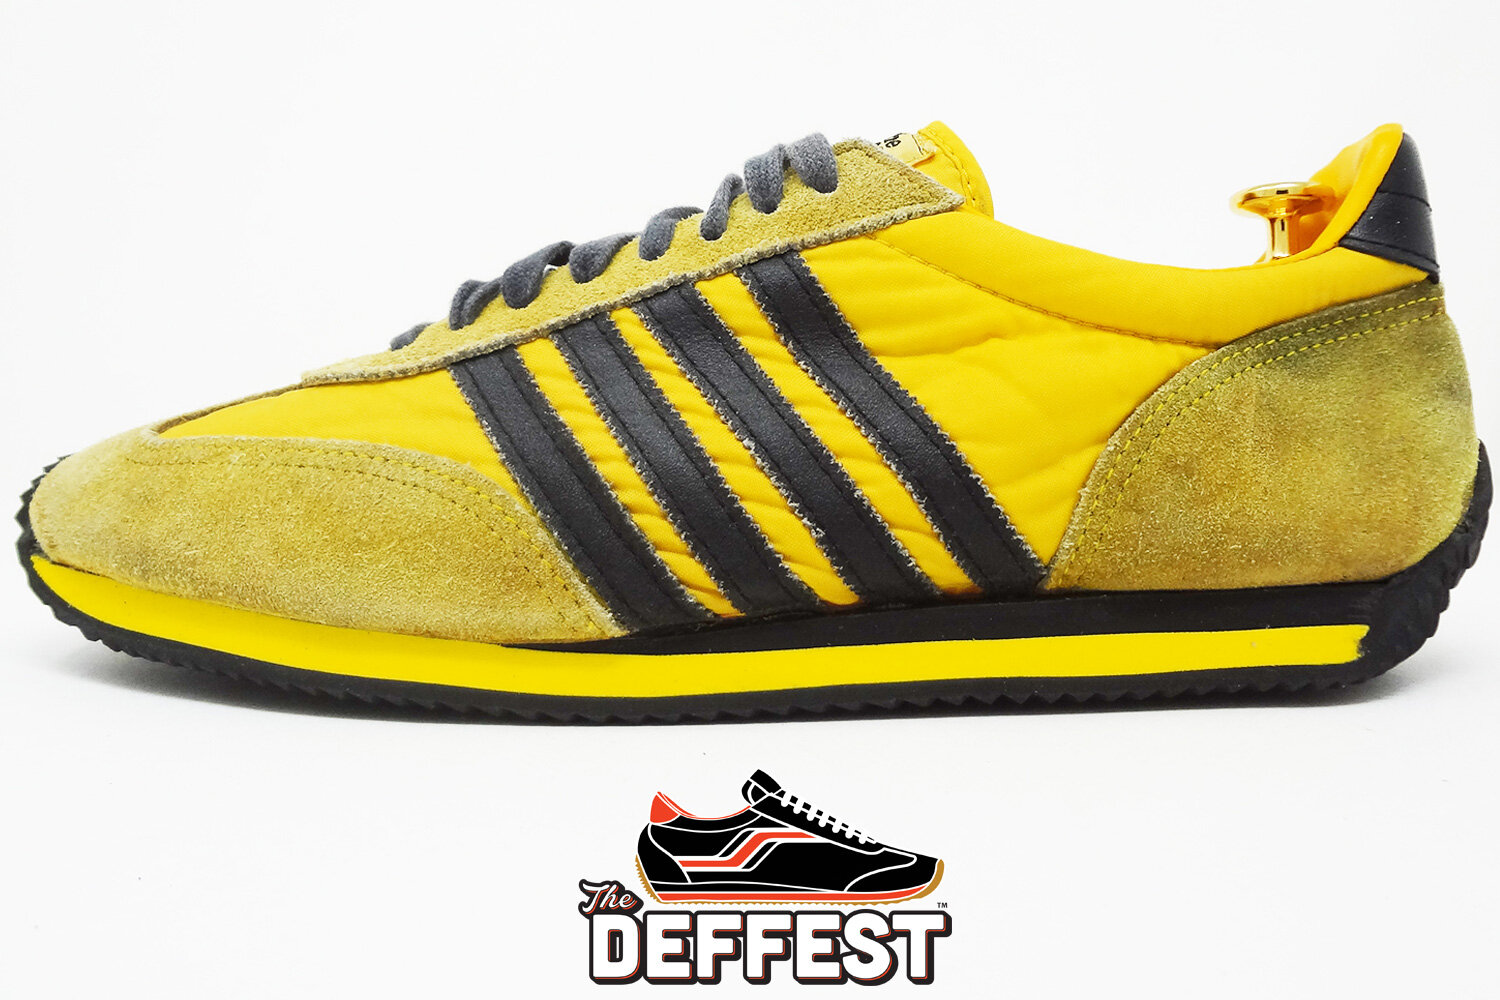 Sears The Winner yellow and black retro sneakers @ The Deffest